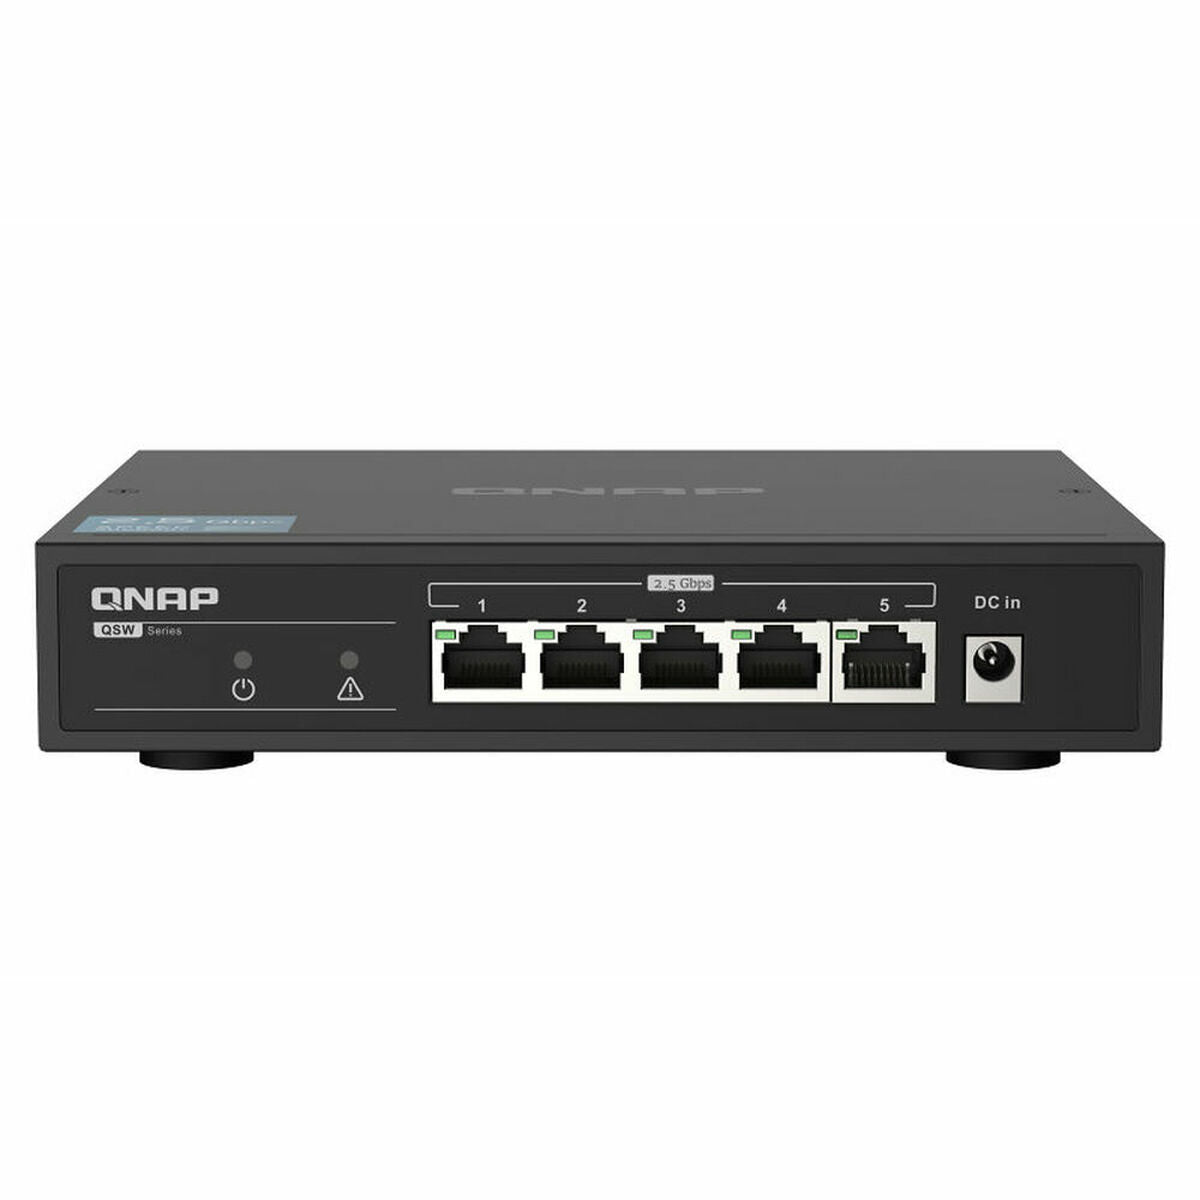 Switch Qnap QSW-1105-5T, Qnap, Computing, Network devices, switch-qnap-qsw-1105-5t-1, Brand_Qnap, category-reference-2609, category-reference-2803, category-reference-2827, category-reference-t-19685, category-reference-t-19914, Condition_NEW, networks/wiring, Price_100 - 200, Teleworking, RiotNook